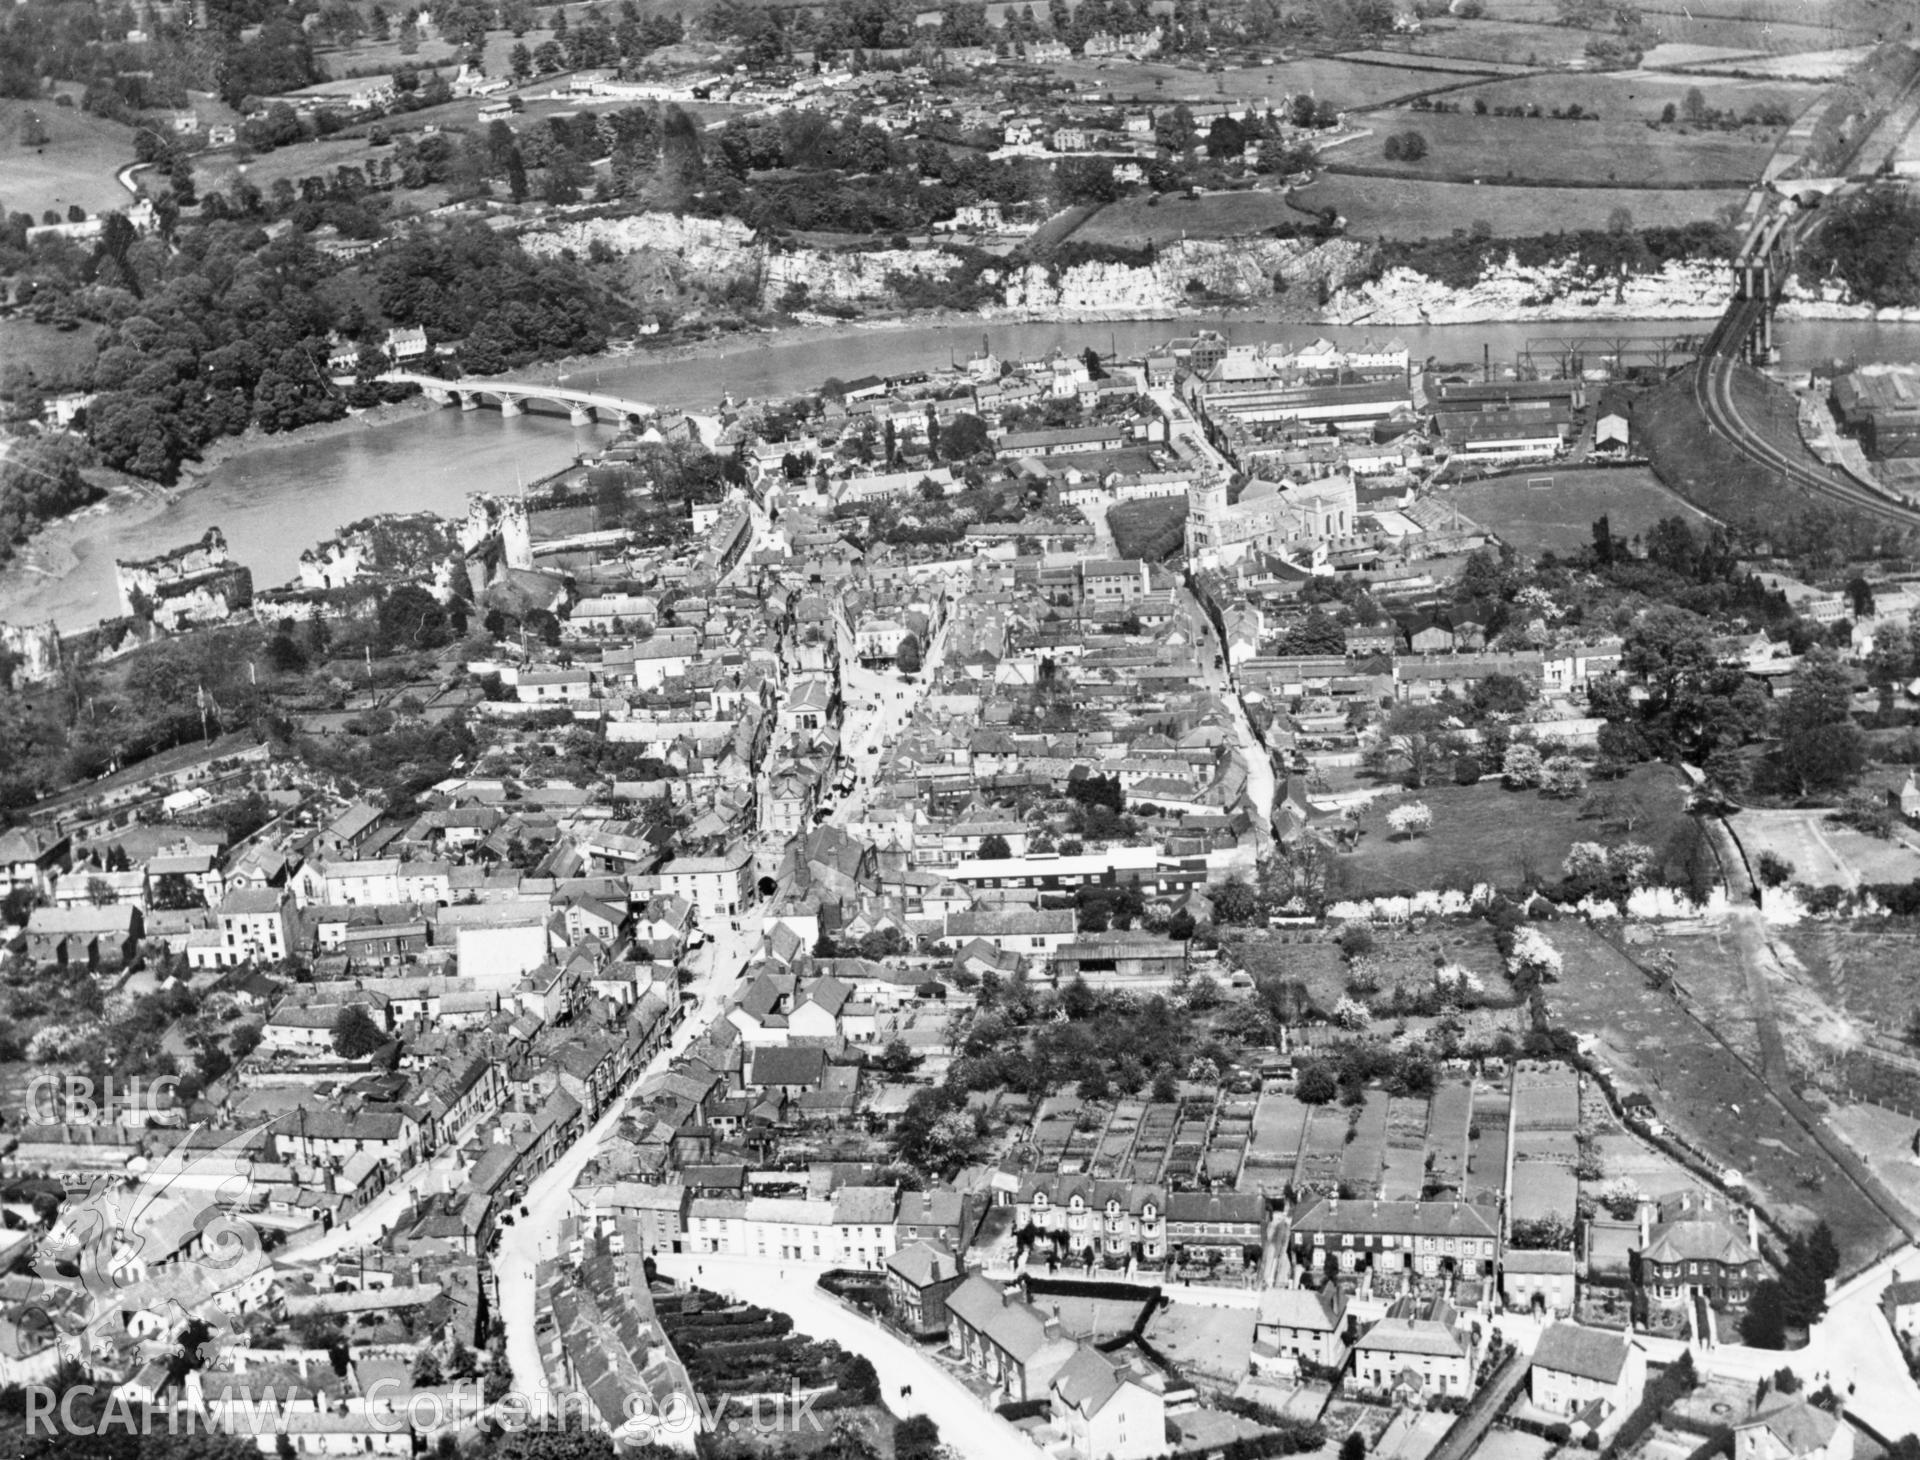 General view of Chepstow showing the tubular suspension bridge. Oblique aerial photograph, 5?x4? BW glass plate.